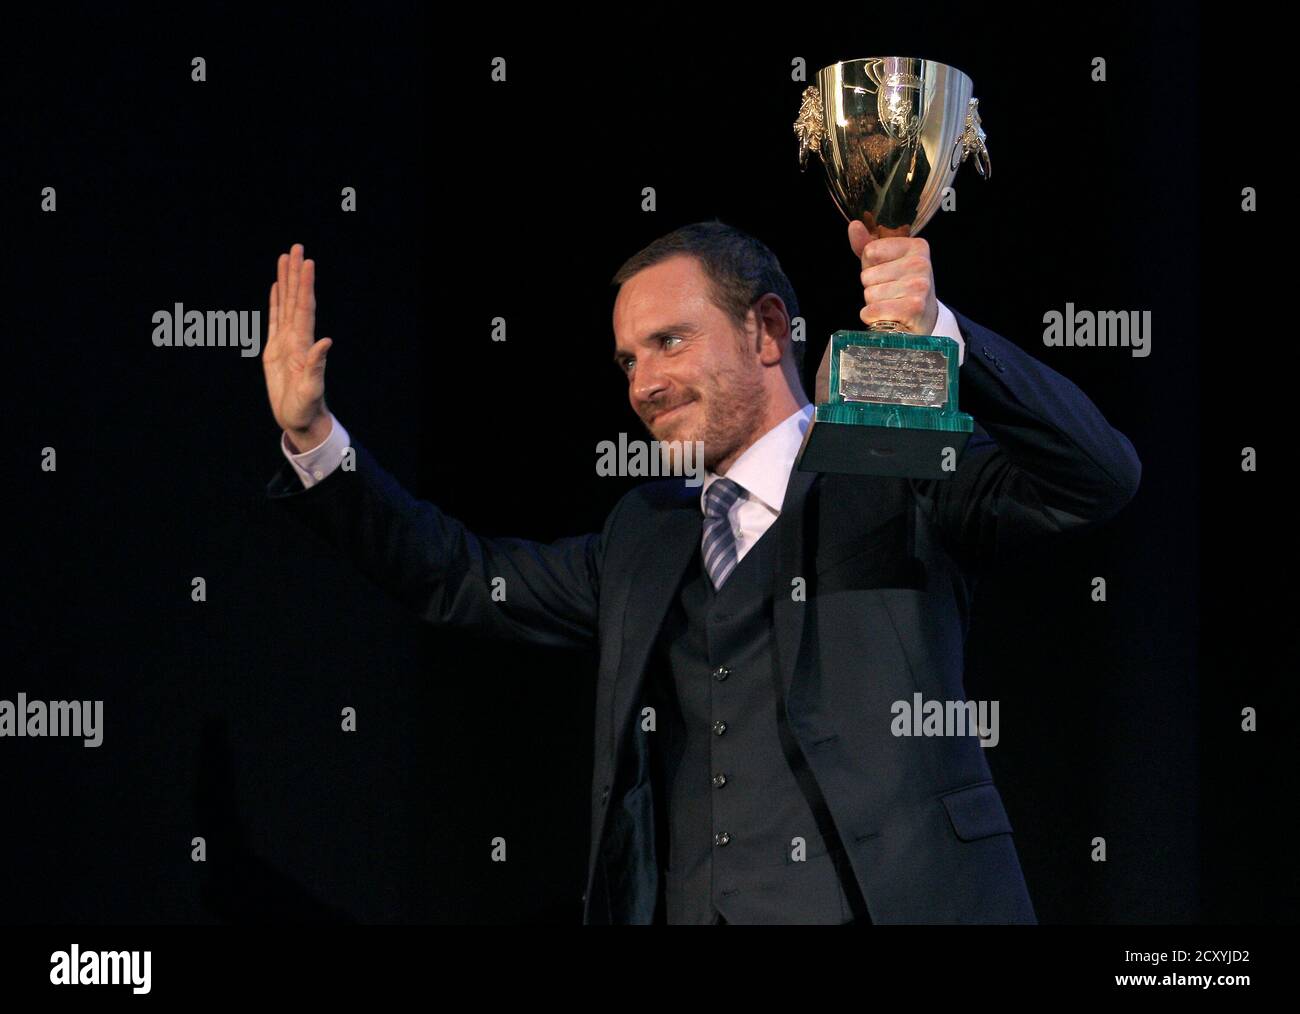 Actor Michael Fassbender receives the Coppa Volpi for Best Actor for his movie 'Shame' during the closing ceremony of the 68th Venice Film Festival September 10, 2011.REUTERS/Alessandro Bianchi (ITALY - Tags: ENTERTAINMENT) Stock Photo